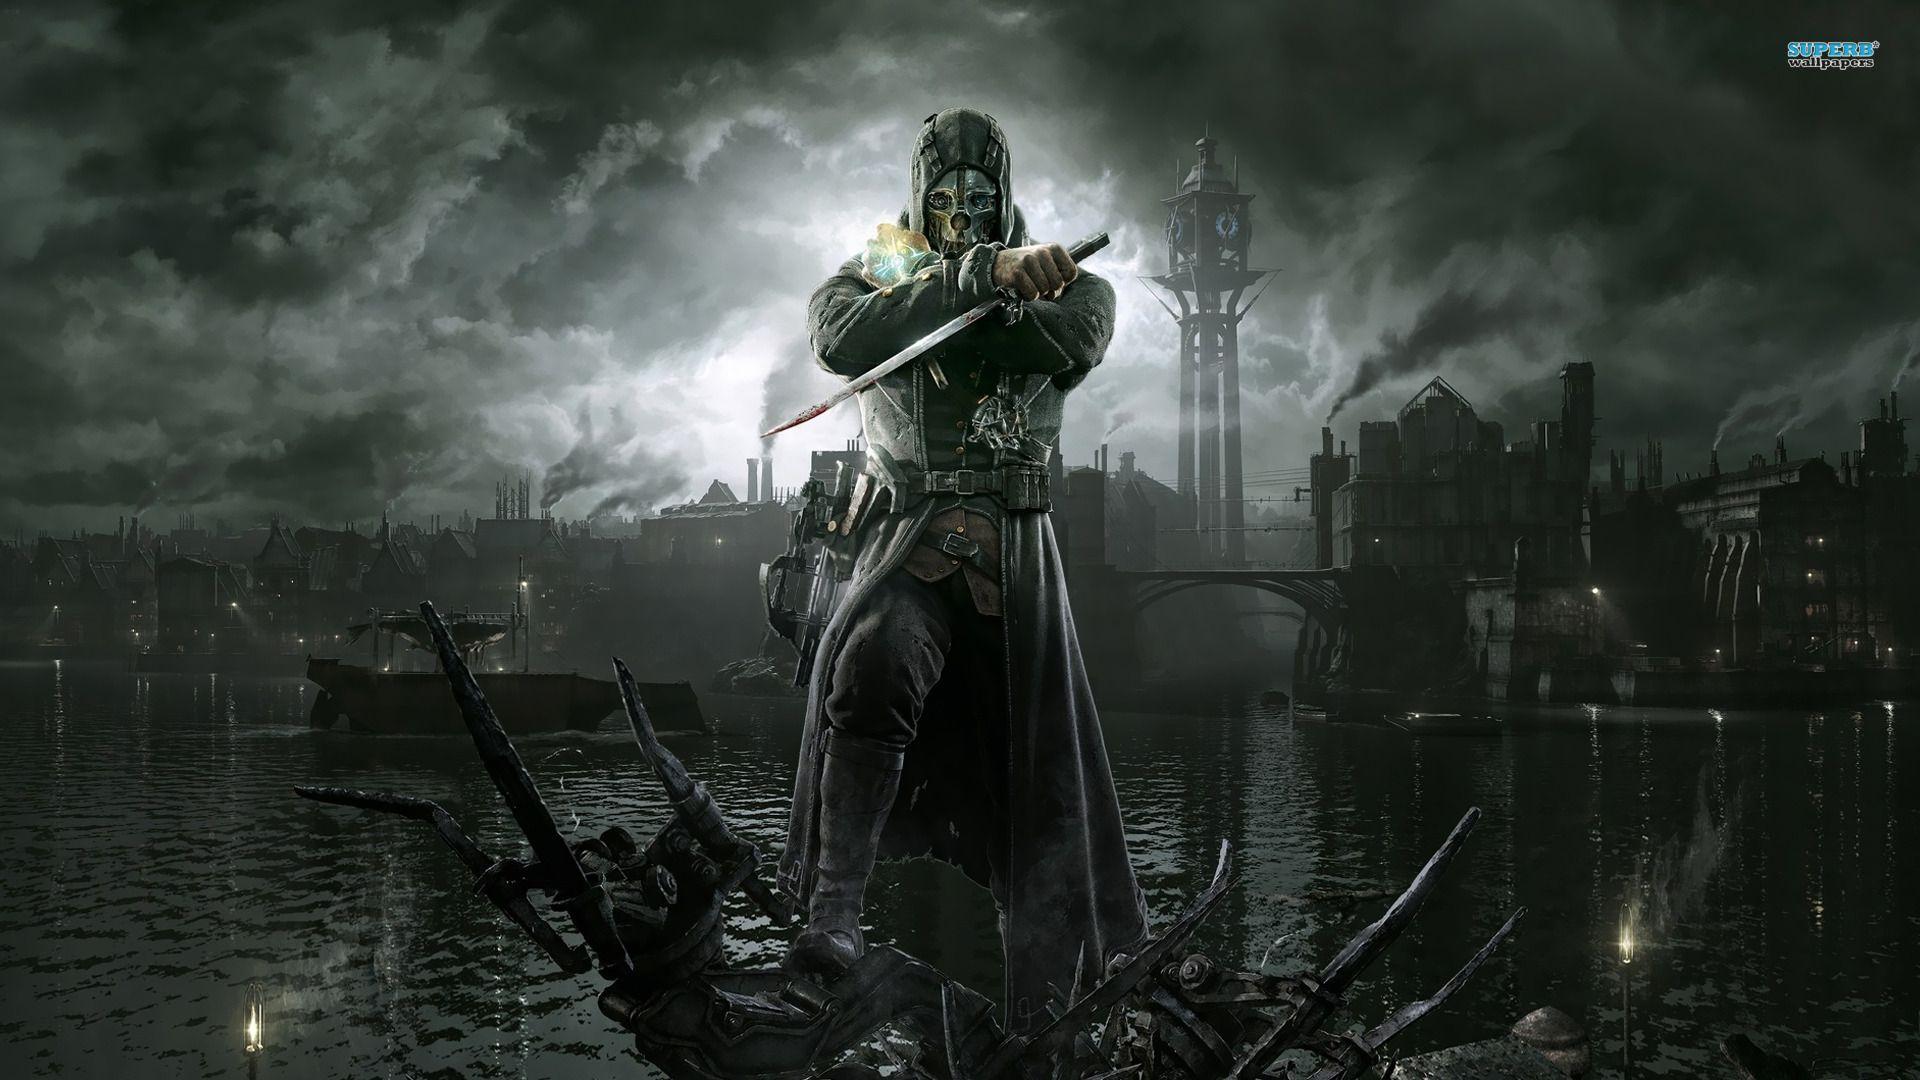 Dishonored Wallpaper, 41 Desktop Image of Dishonored